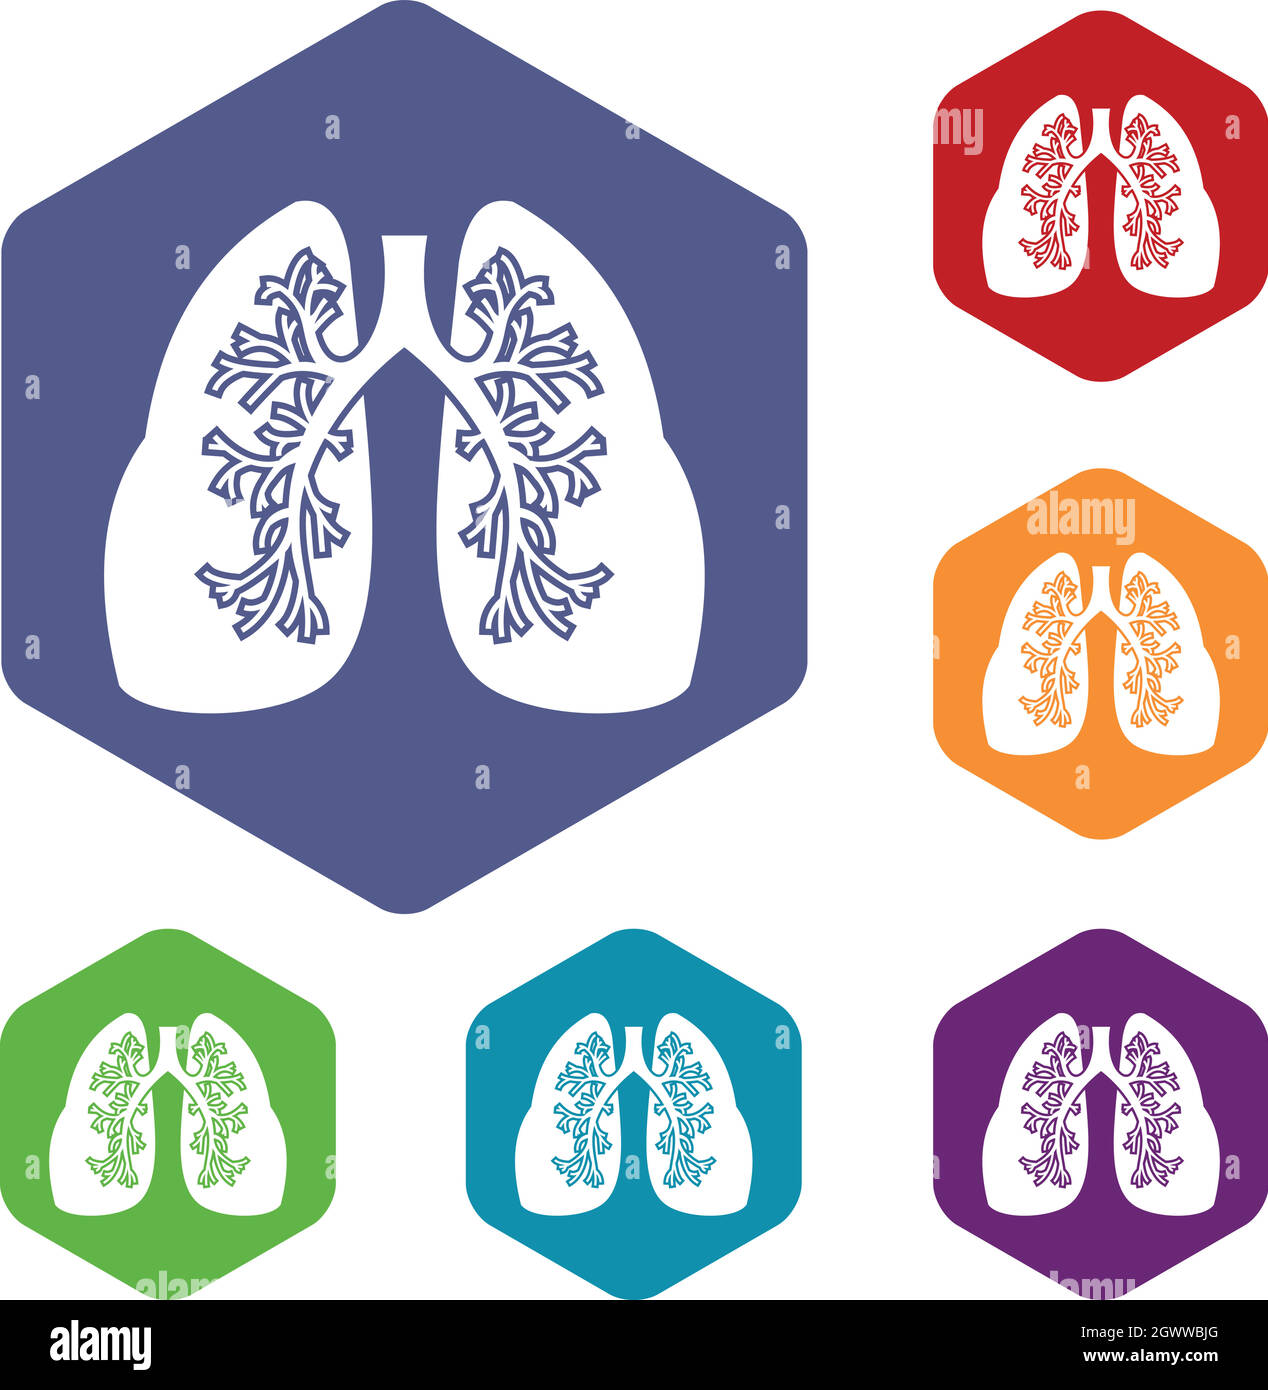 Lungs icons set Stock Vector